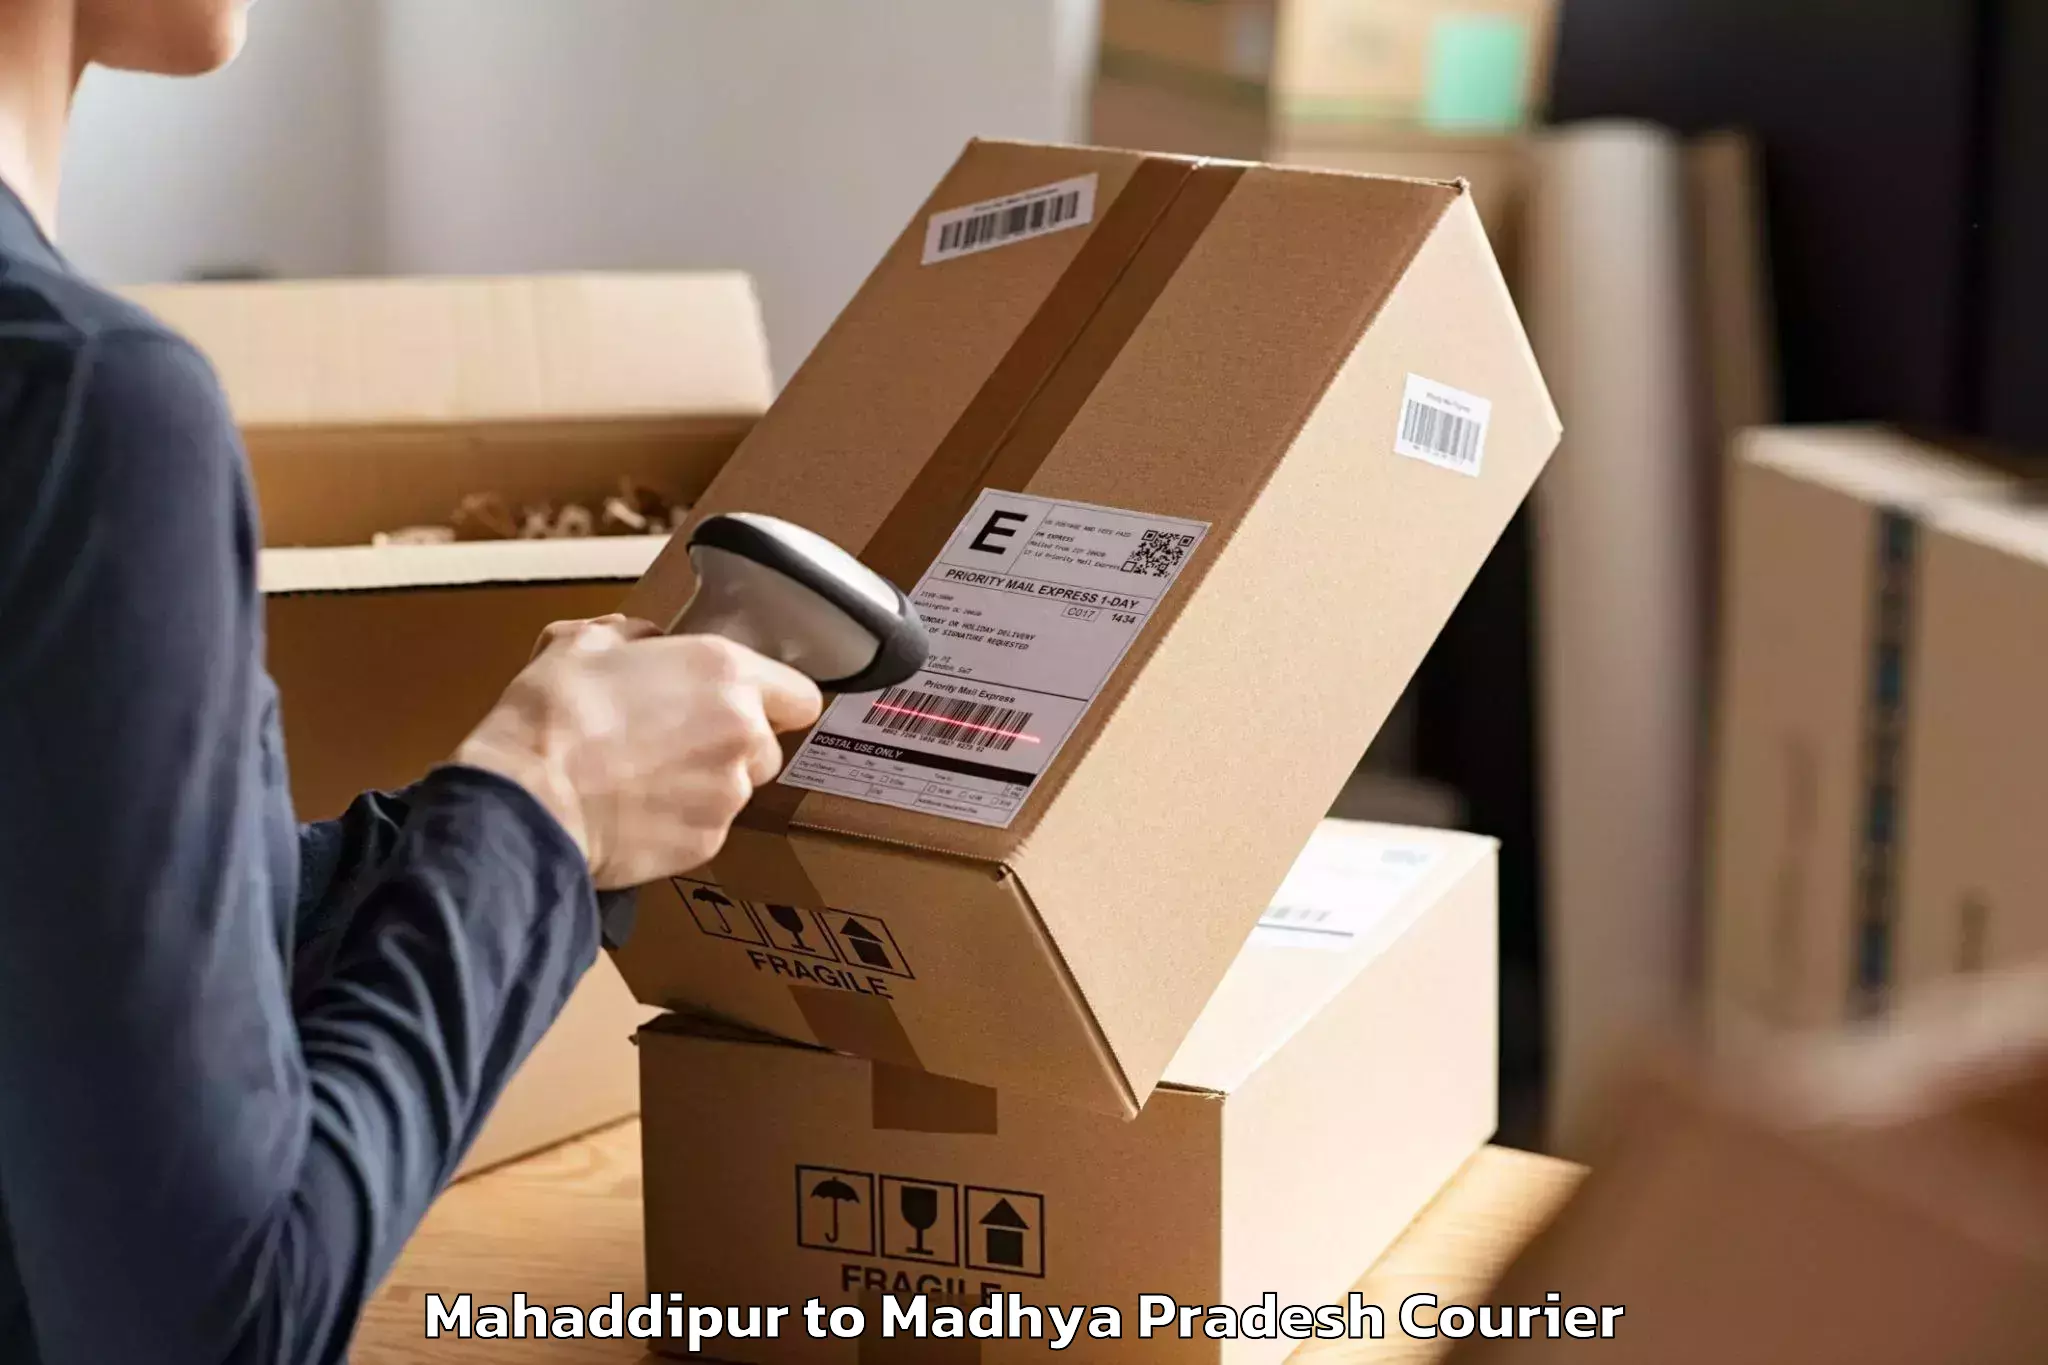 Efficient relocation services Mahaddipur to BHEL Bhopal